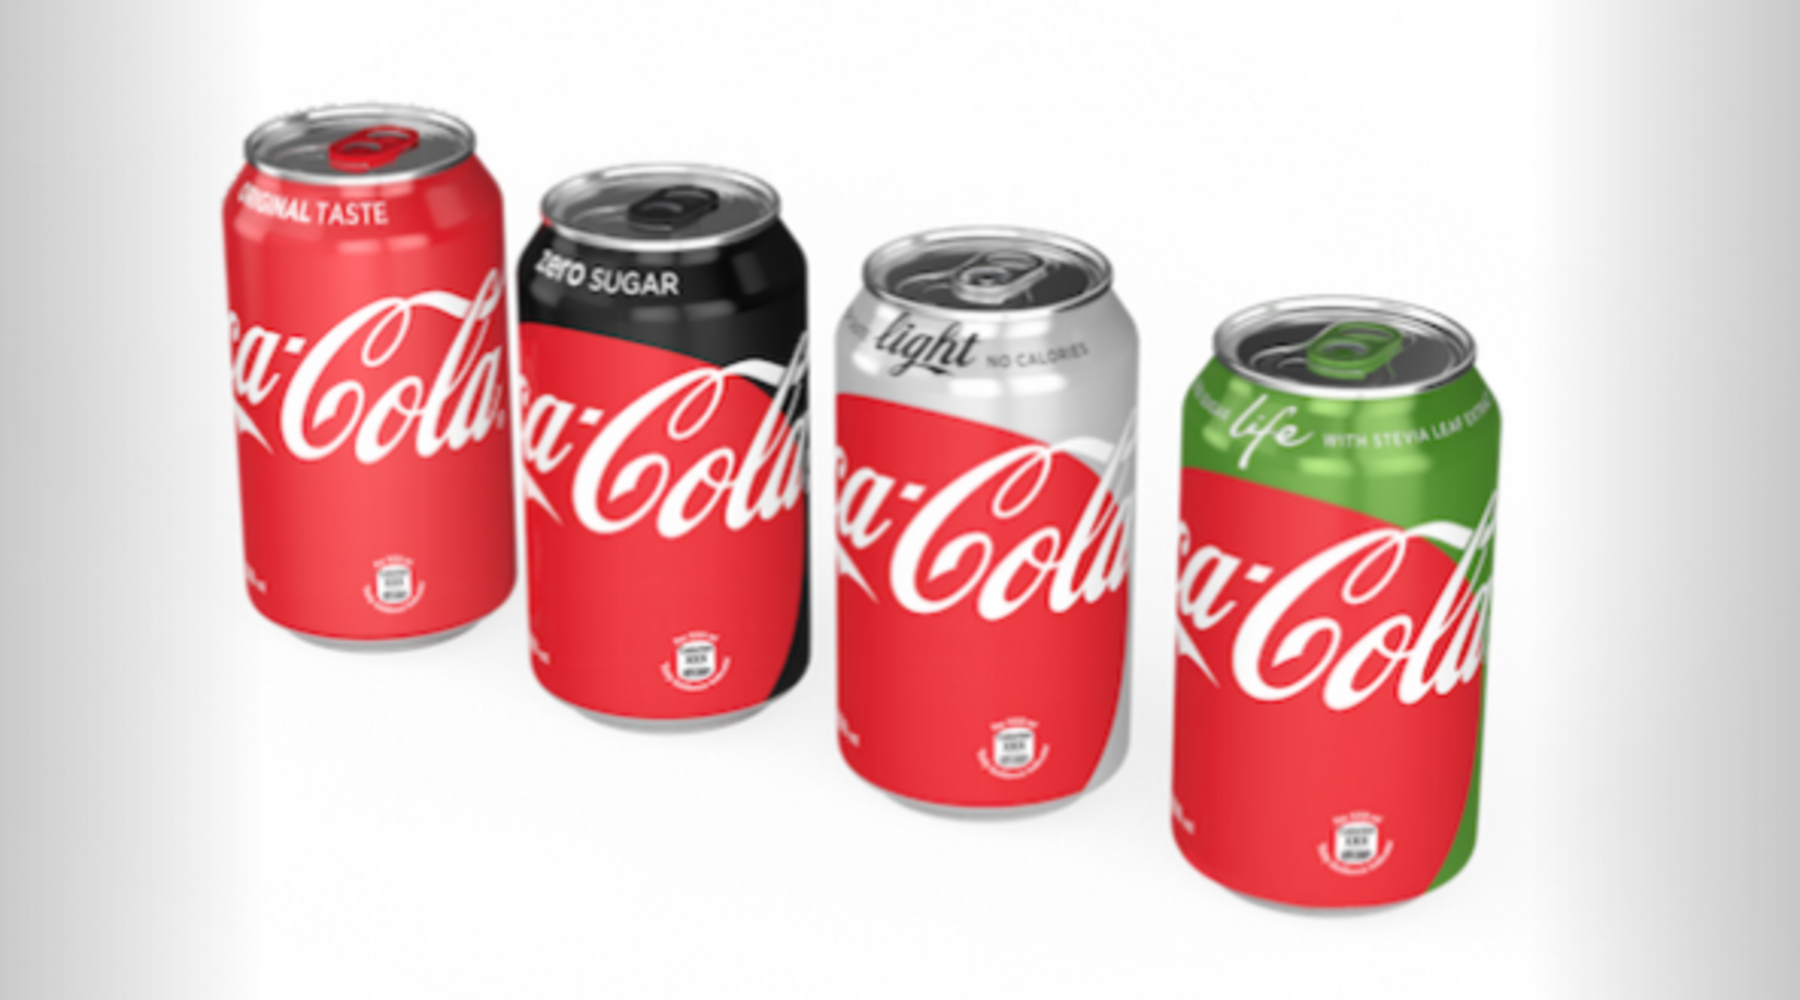 Coca-Cola is changing look - Marketplace